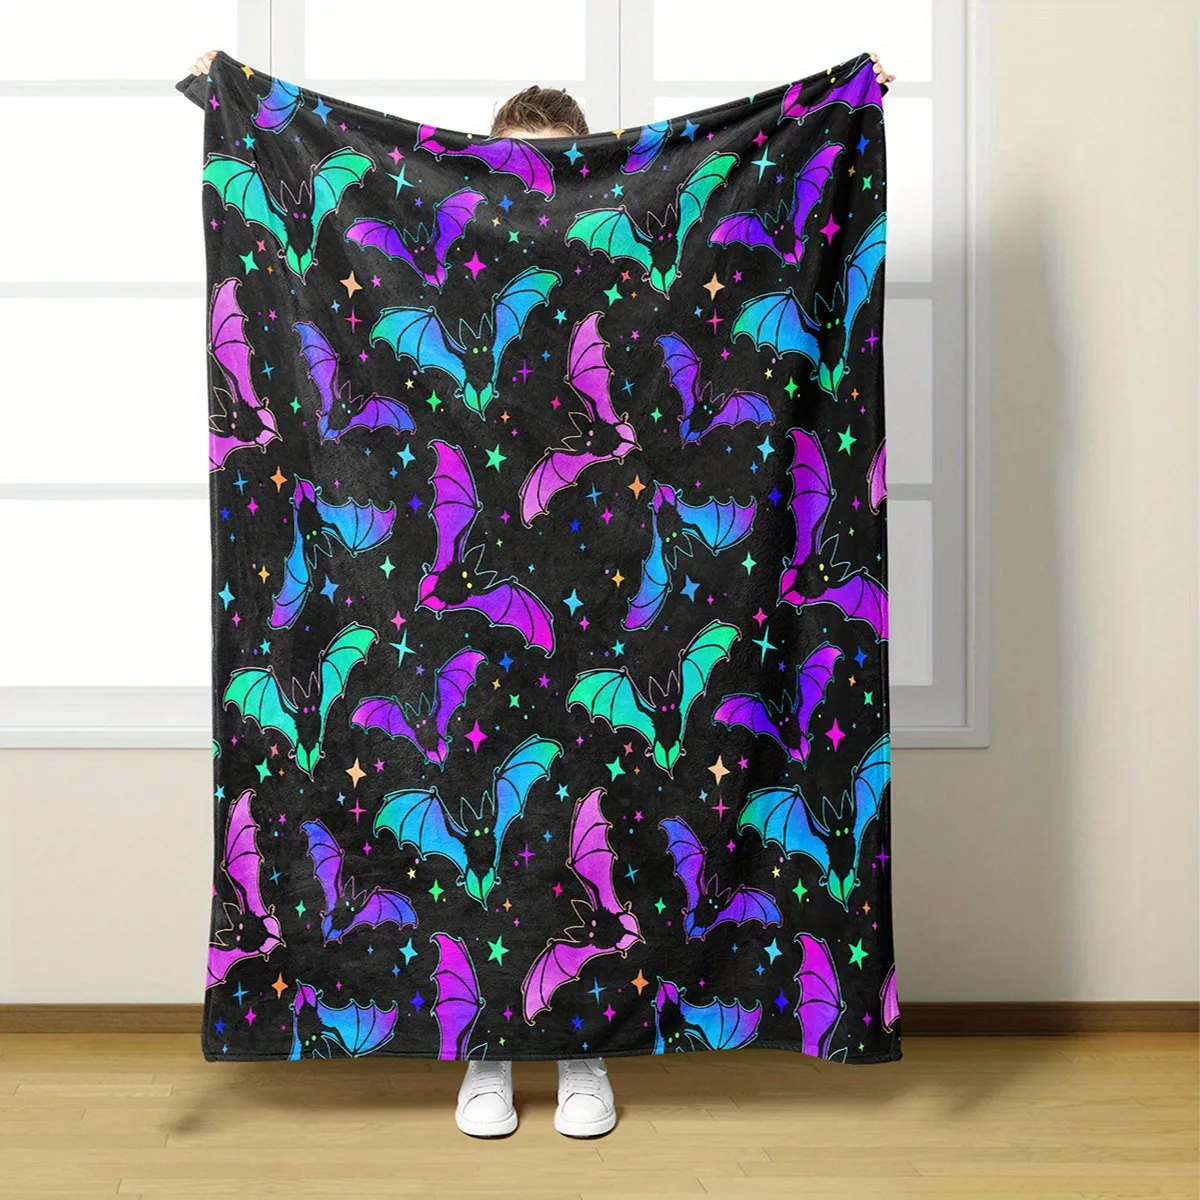 1pc Flannel Blanket, Colorful Bat Print Blanket, Warm Cozy Soft Throw Blanket For Couch Bed Sofa